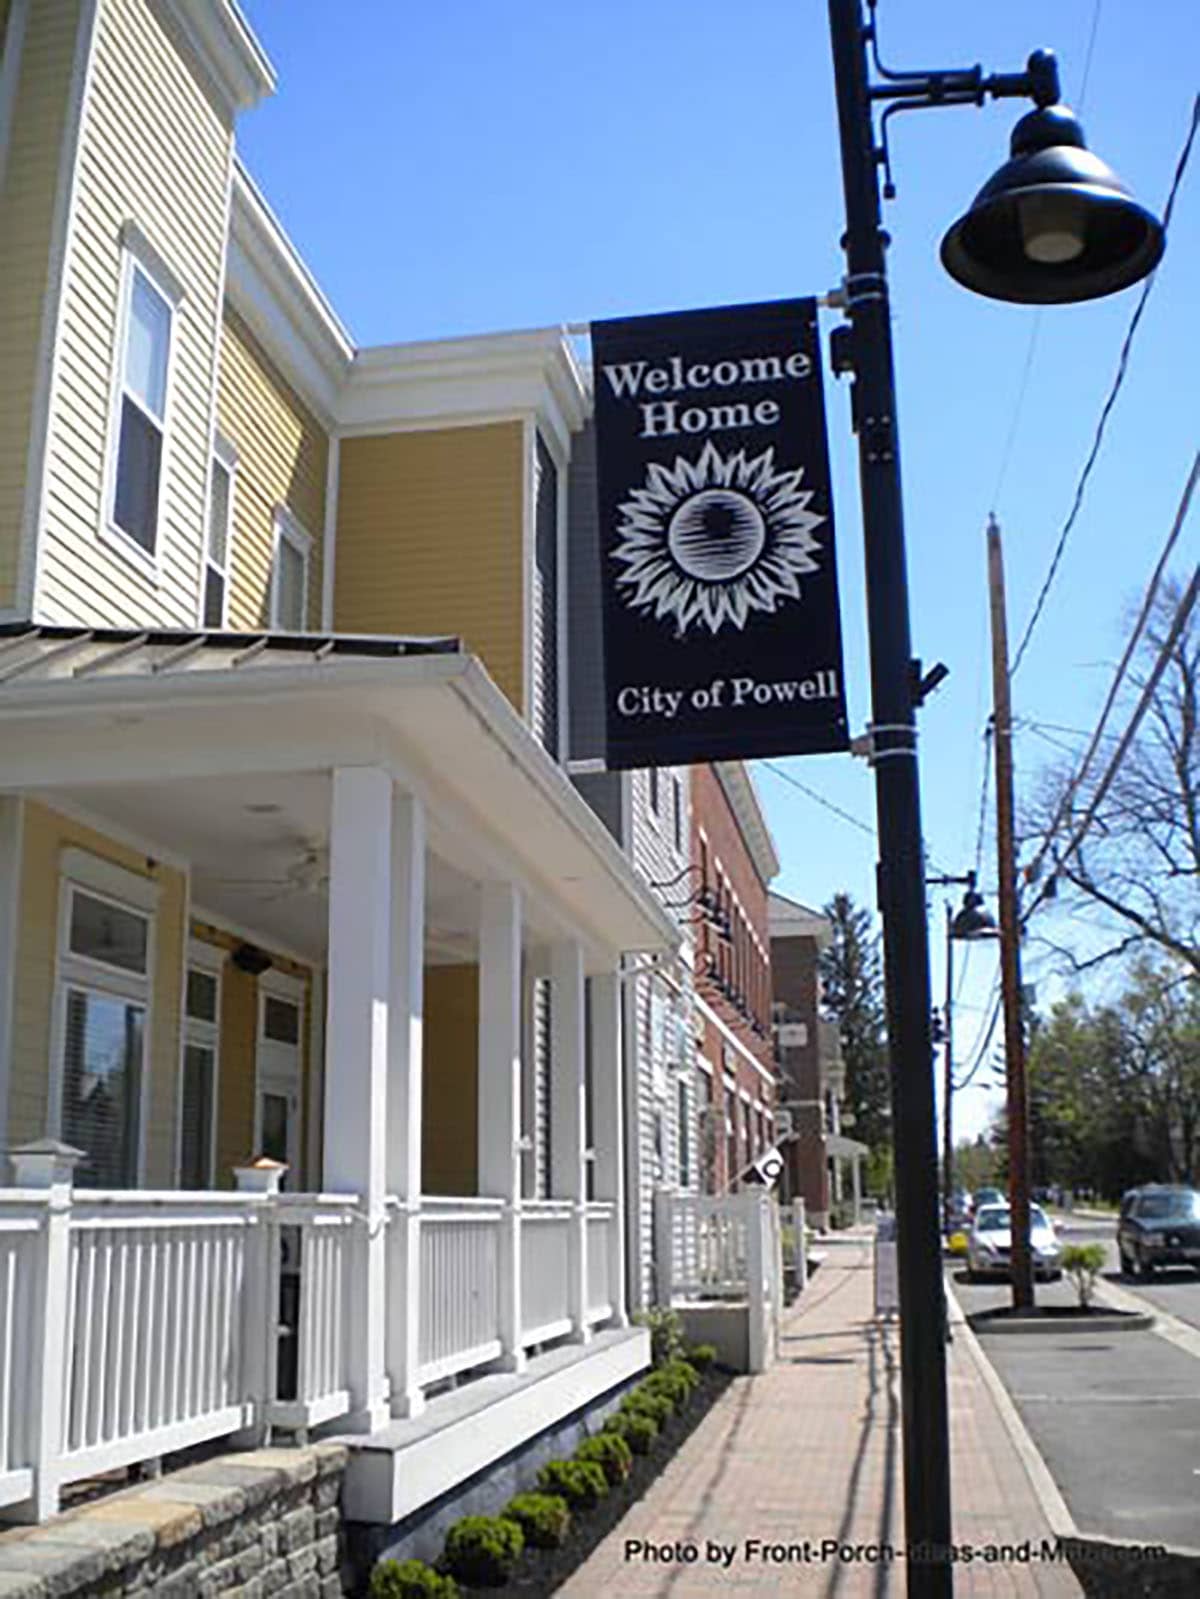 Photo of "Welcome Home City of Powell" light post banner in front of yellow house. 